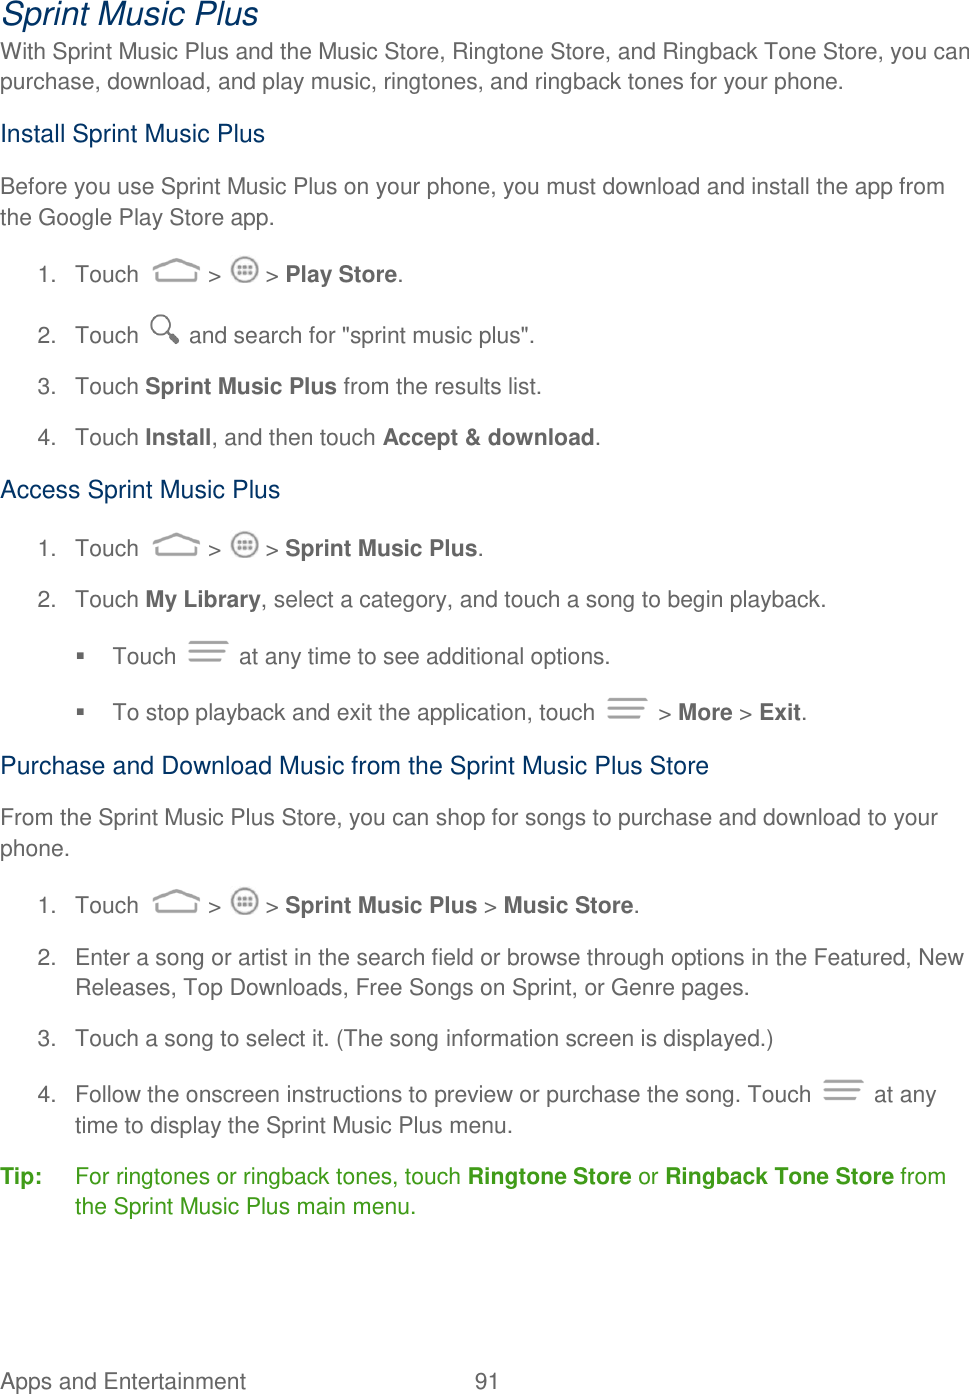 Apps and Entertainment  91   Sprint Music Plus With Sprint Music Plus and the Music Store, Ringtone Store, and Ringback Tone Store, you can purchase, download, and play music, ringtones, and ringback tones for your phone.  Install Sprint Music Plus Before you use Sprint Music Plus on your phone, you must download and install the app from the Google Play Store app. 1.  Touch   &gt;   &gt; Play Store.  2.  Touch   and search for &quot;sprint music plus&quot;.  3.  Touch Sprint Music Plus from the results list.  4.  Touch Install, and then touch Accept &amp; download.  Access Sprint Music Plus 1.  Touch   &gt;   &gt; Sprint Music Plus. 2.  Touch My Library, select a category, and touch a song to begin playback.   Touch   at any time to see additional options.   To stop playback and exit the application, touch   &gt; More &gt; Exit. Purchase and Download Music from the Sprint Music Plus Store From the Sprint Music Plus Store, you can shop for songs to purchase and download to your phone. 1.  Touch   &gt;   &gt; Sprint Music Plus &gt; Music Store. 2.  Enter a song or artist in the search field or browse through options in the Featured, New Releases, Top Downloads, Free Songs on Sprint, or Genre pages. 3.  Touch a song to select it. (The song information screen is displayed.) 4.  Follow the onscreen instructions to preview or purchase the song. Touch   at any time to display the Sprint Music Plus menu. Tip:   For ringtones or ringback tones, touch Ringtone Store or Ringback Tone Store from the Sprint Music Plus main menu. 